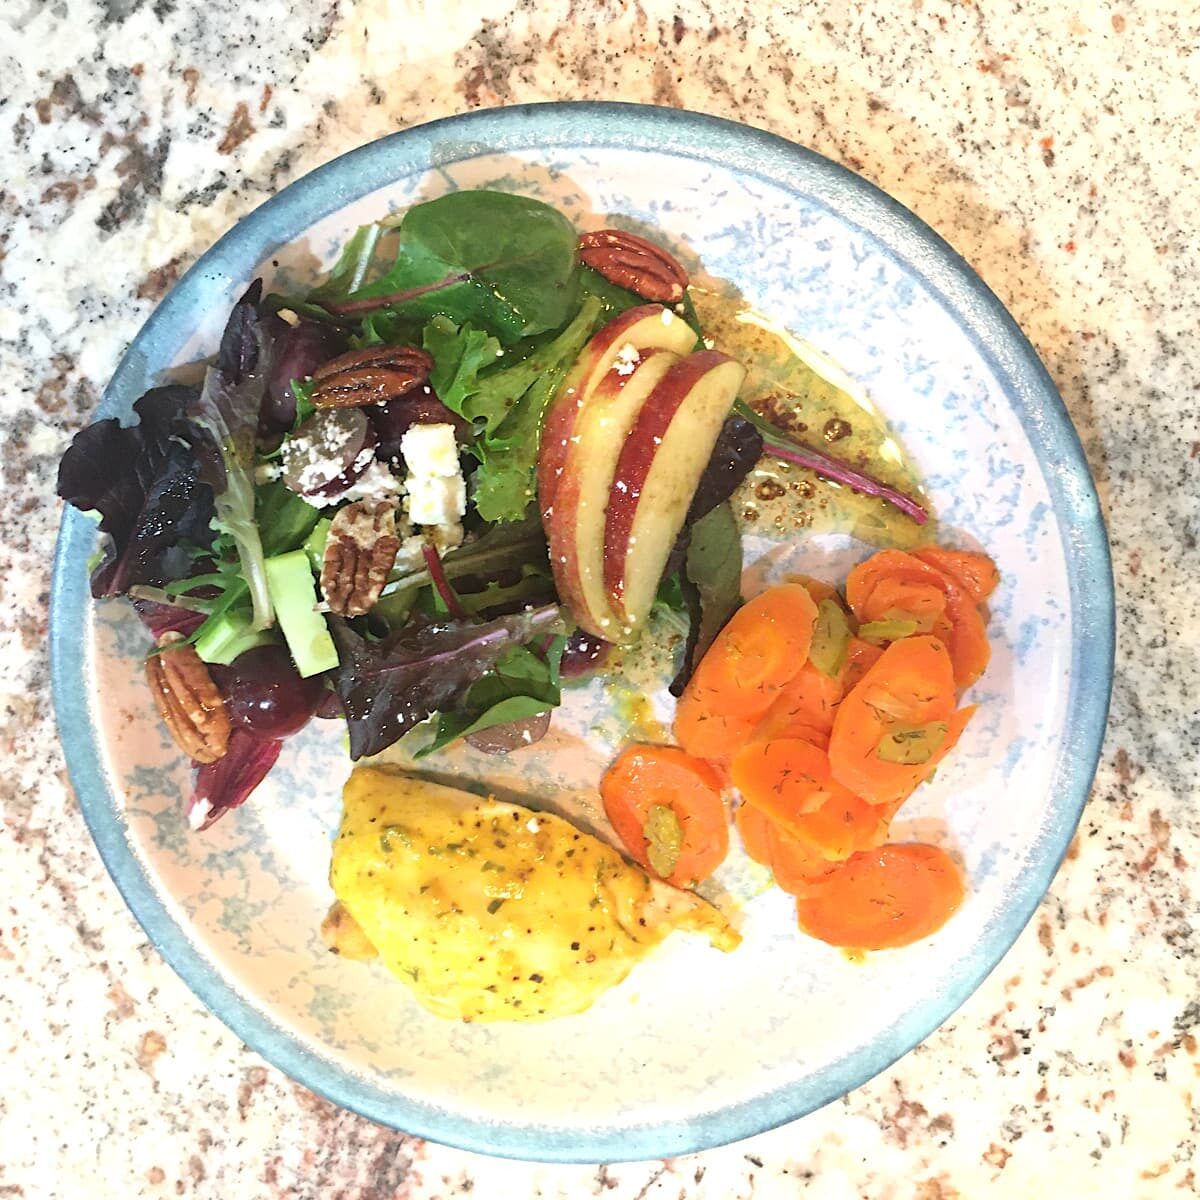 a plate showing sherving portions for half salad, half protein, and half carbohydrate vegetable